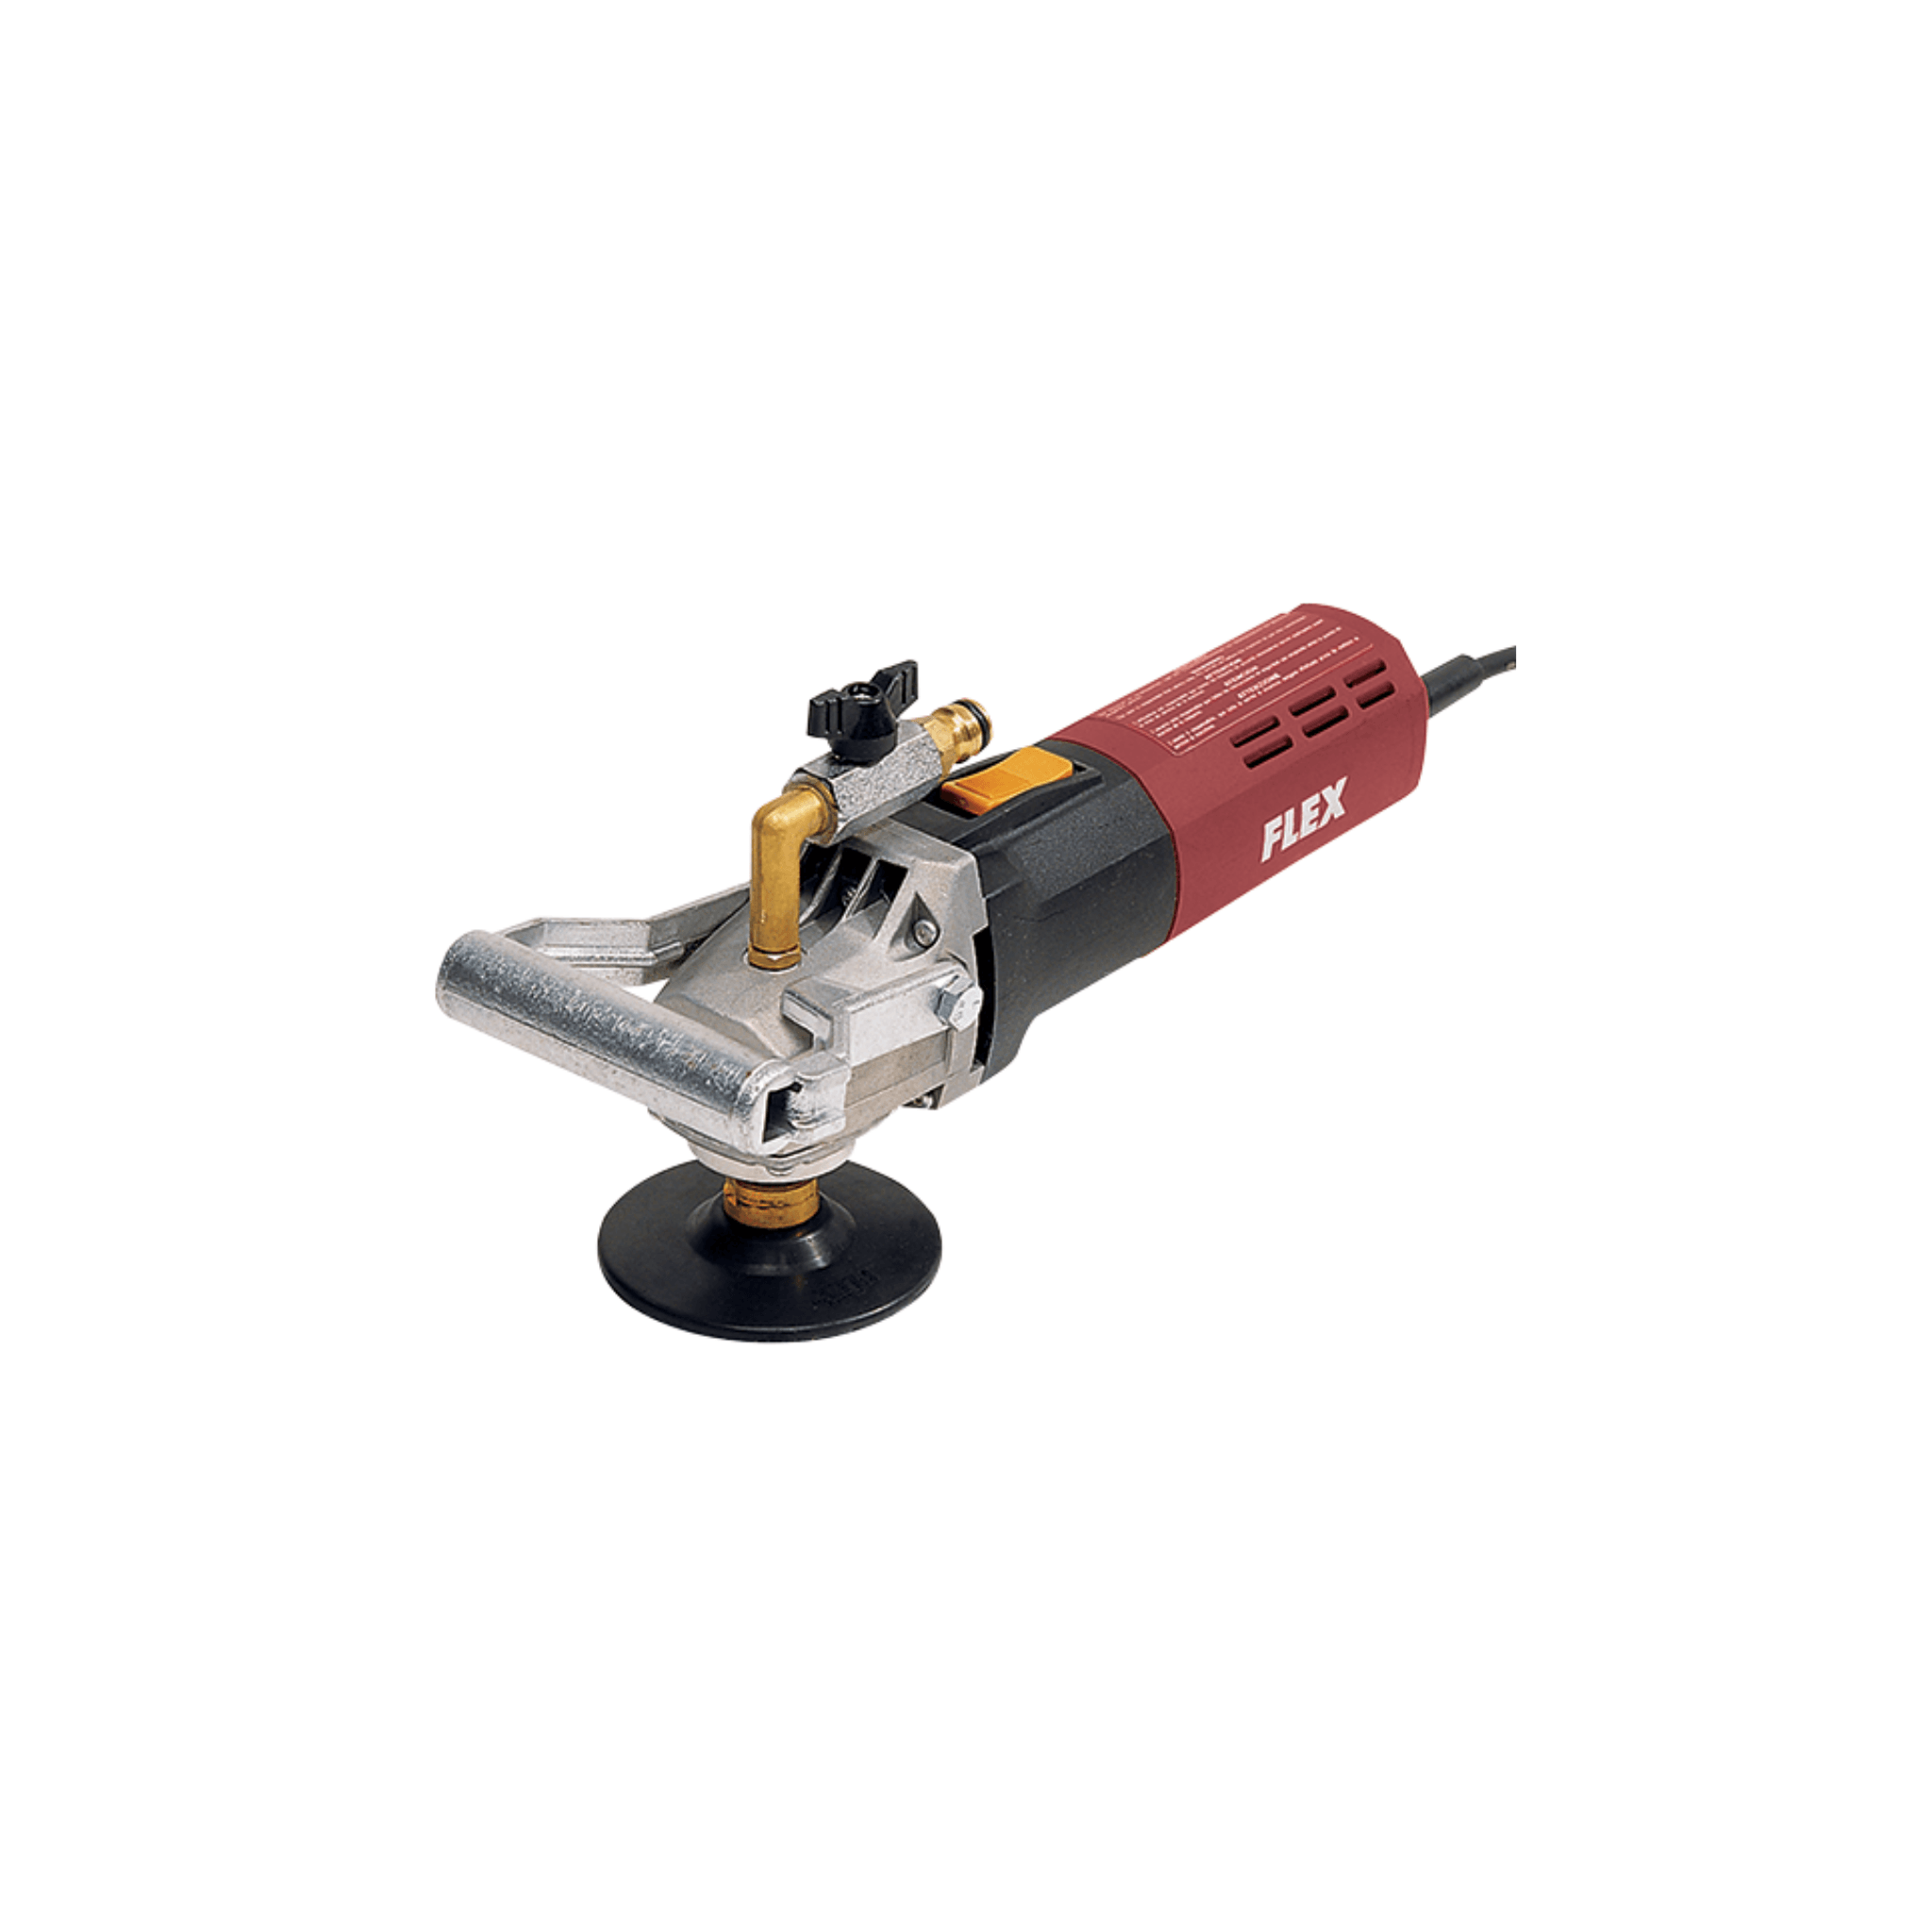 FLEX 5 Inch Compact Single Speed Wet Polisher - Direct Stone Tool Supply, Inc